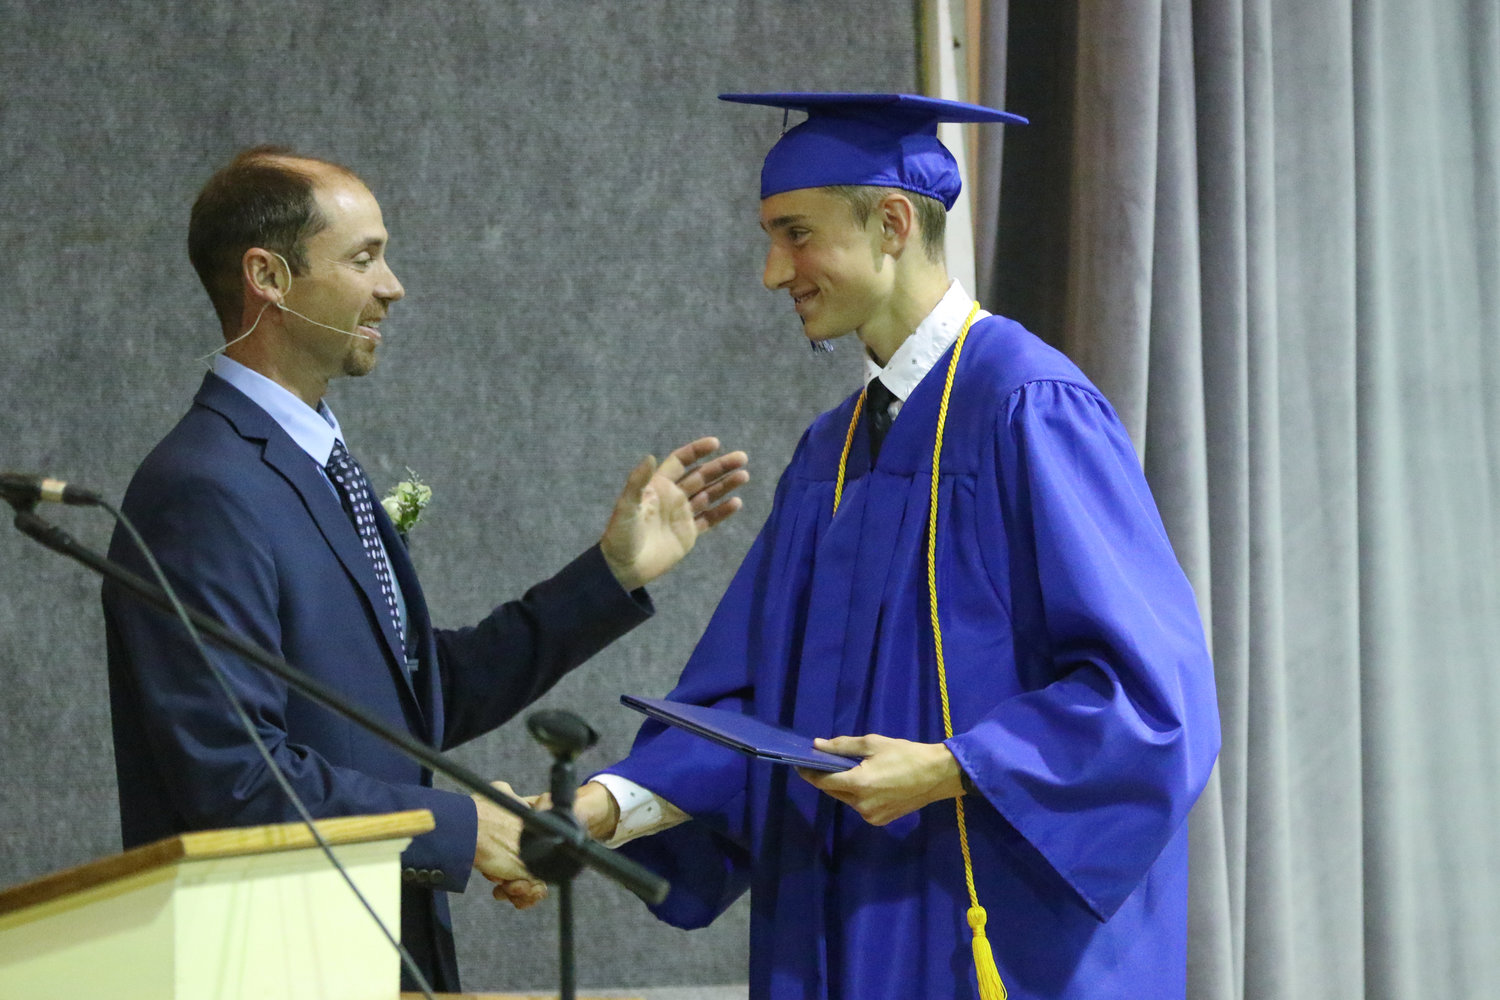 Jamison Stutzman receives his diploma during Pathway Christian School's graduation ceremony on May 16, 2021.